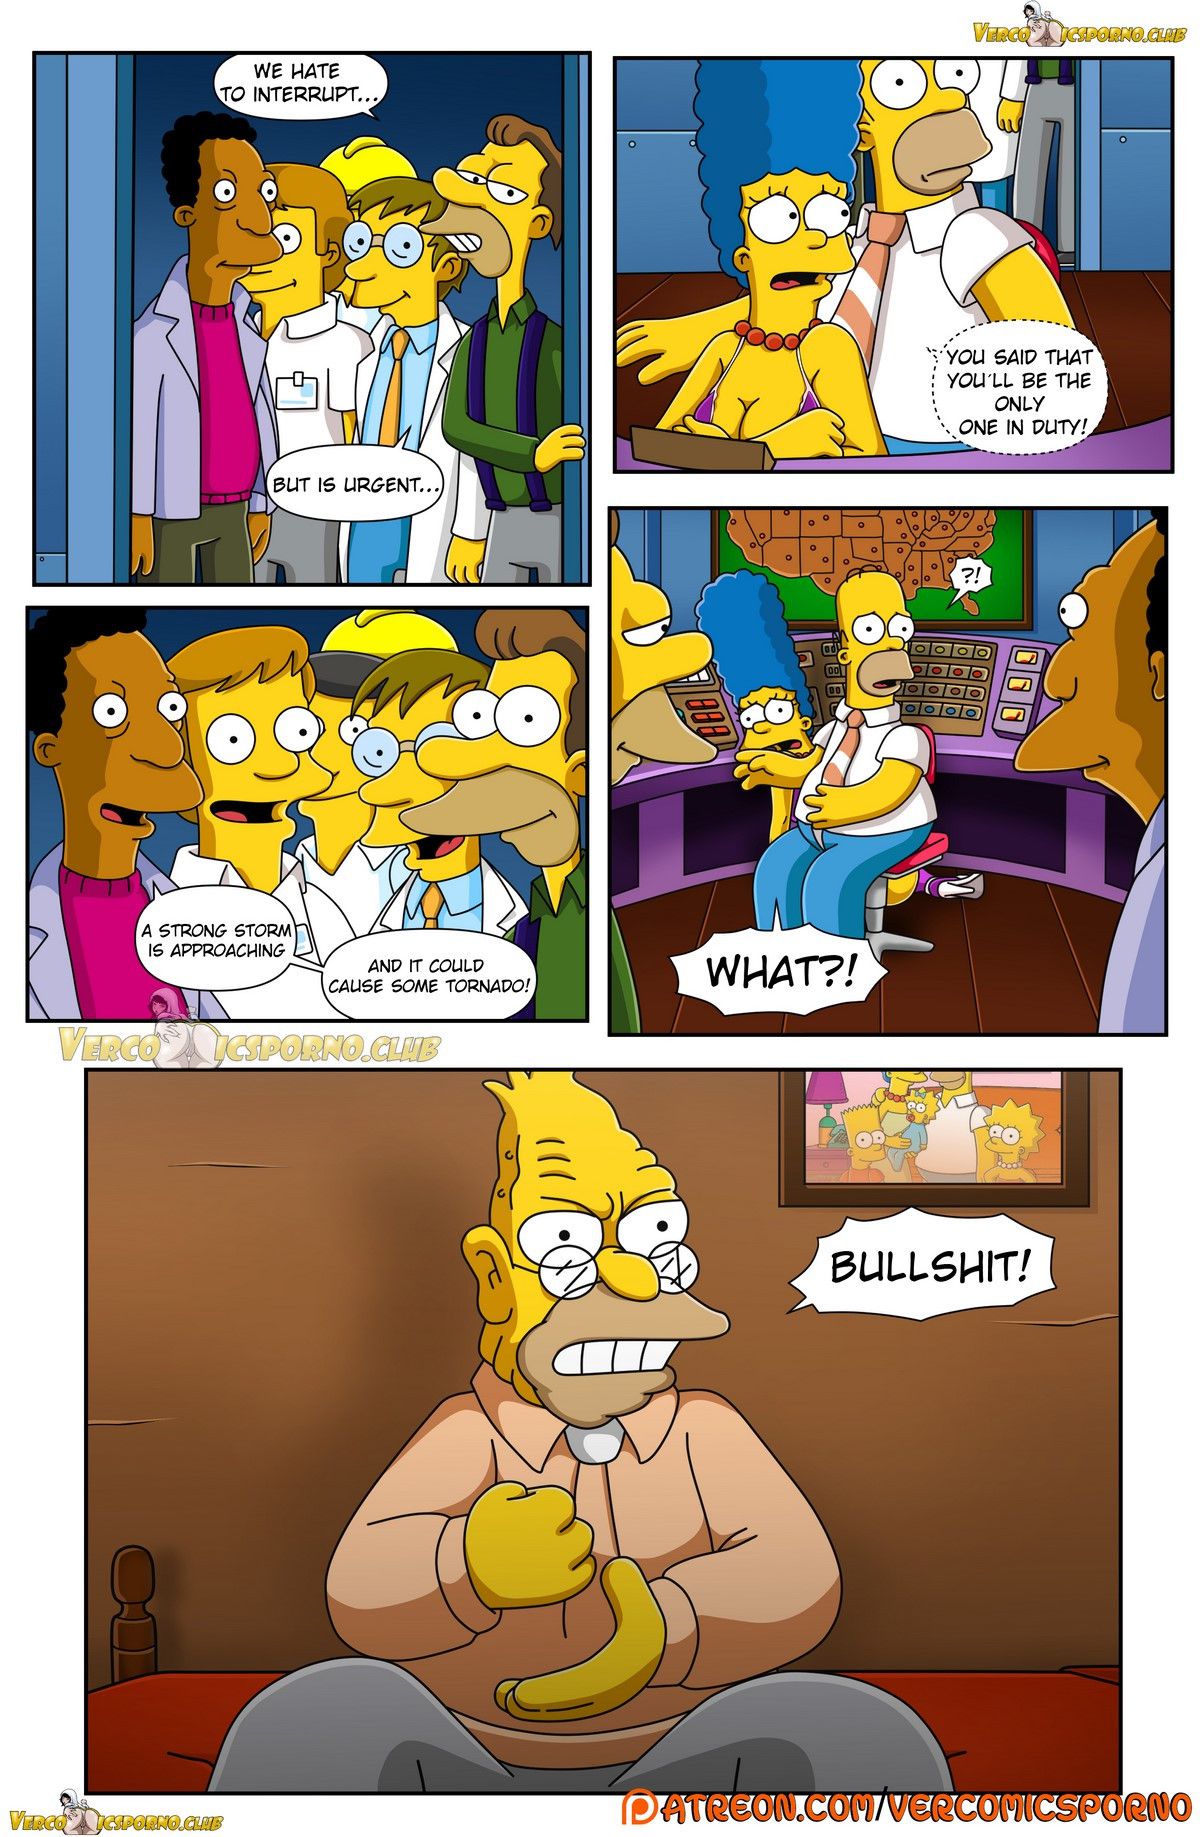 Grandpa and me - [Itooneaxxx] - [Drah Navlag] - [VCP] - [The Simpsons] 6